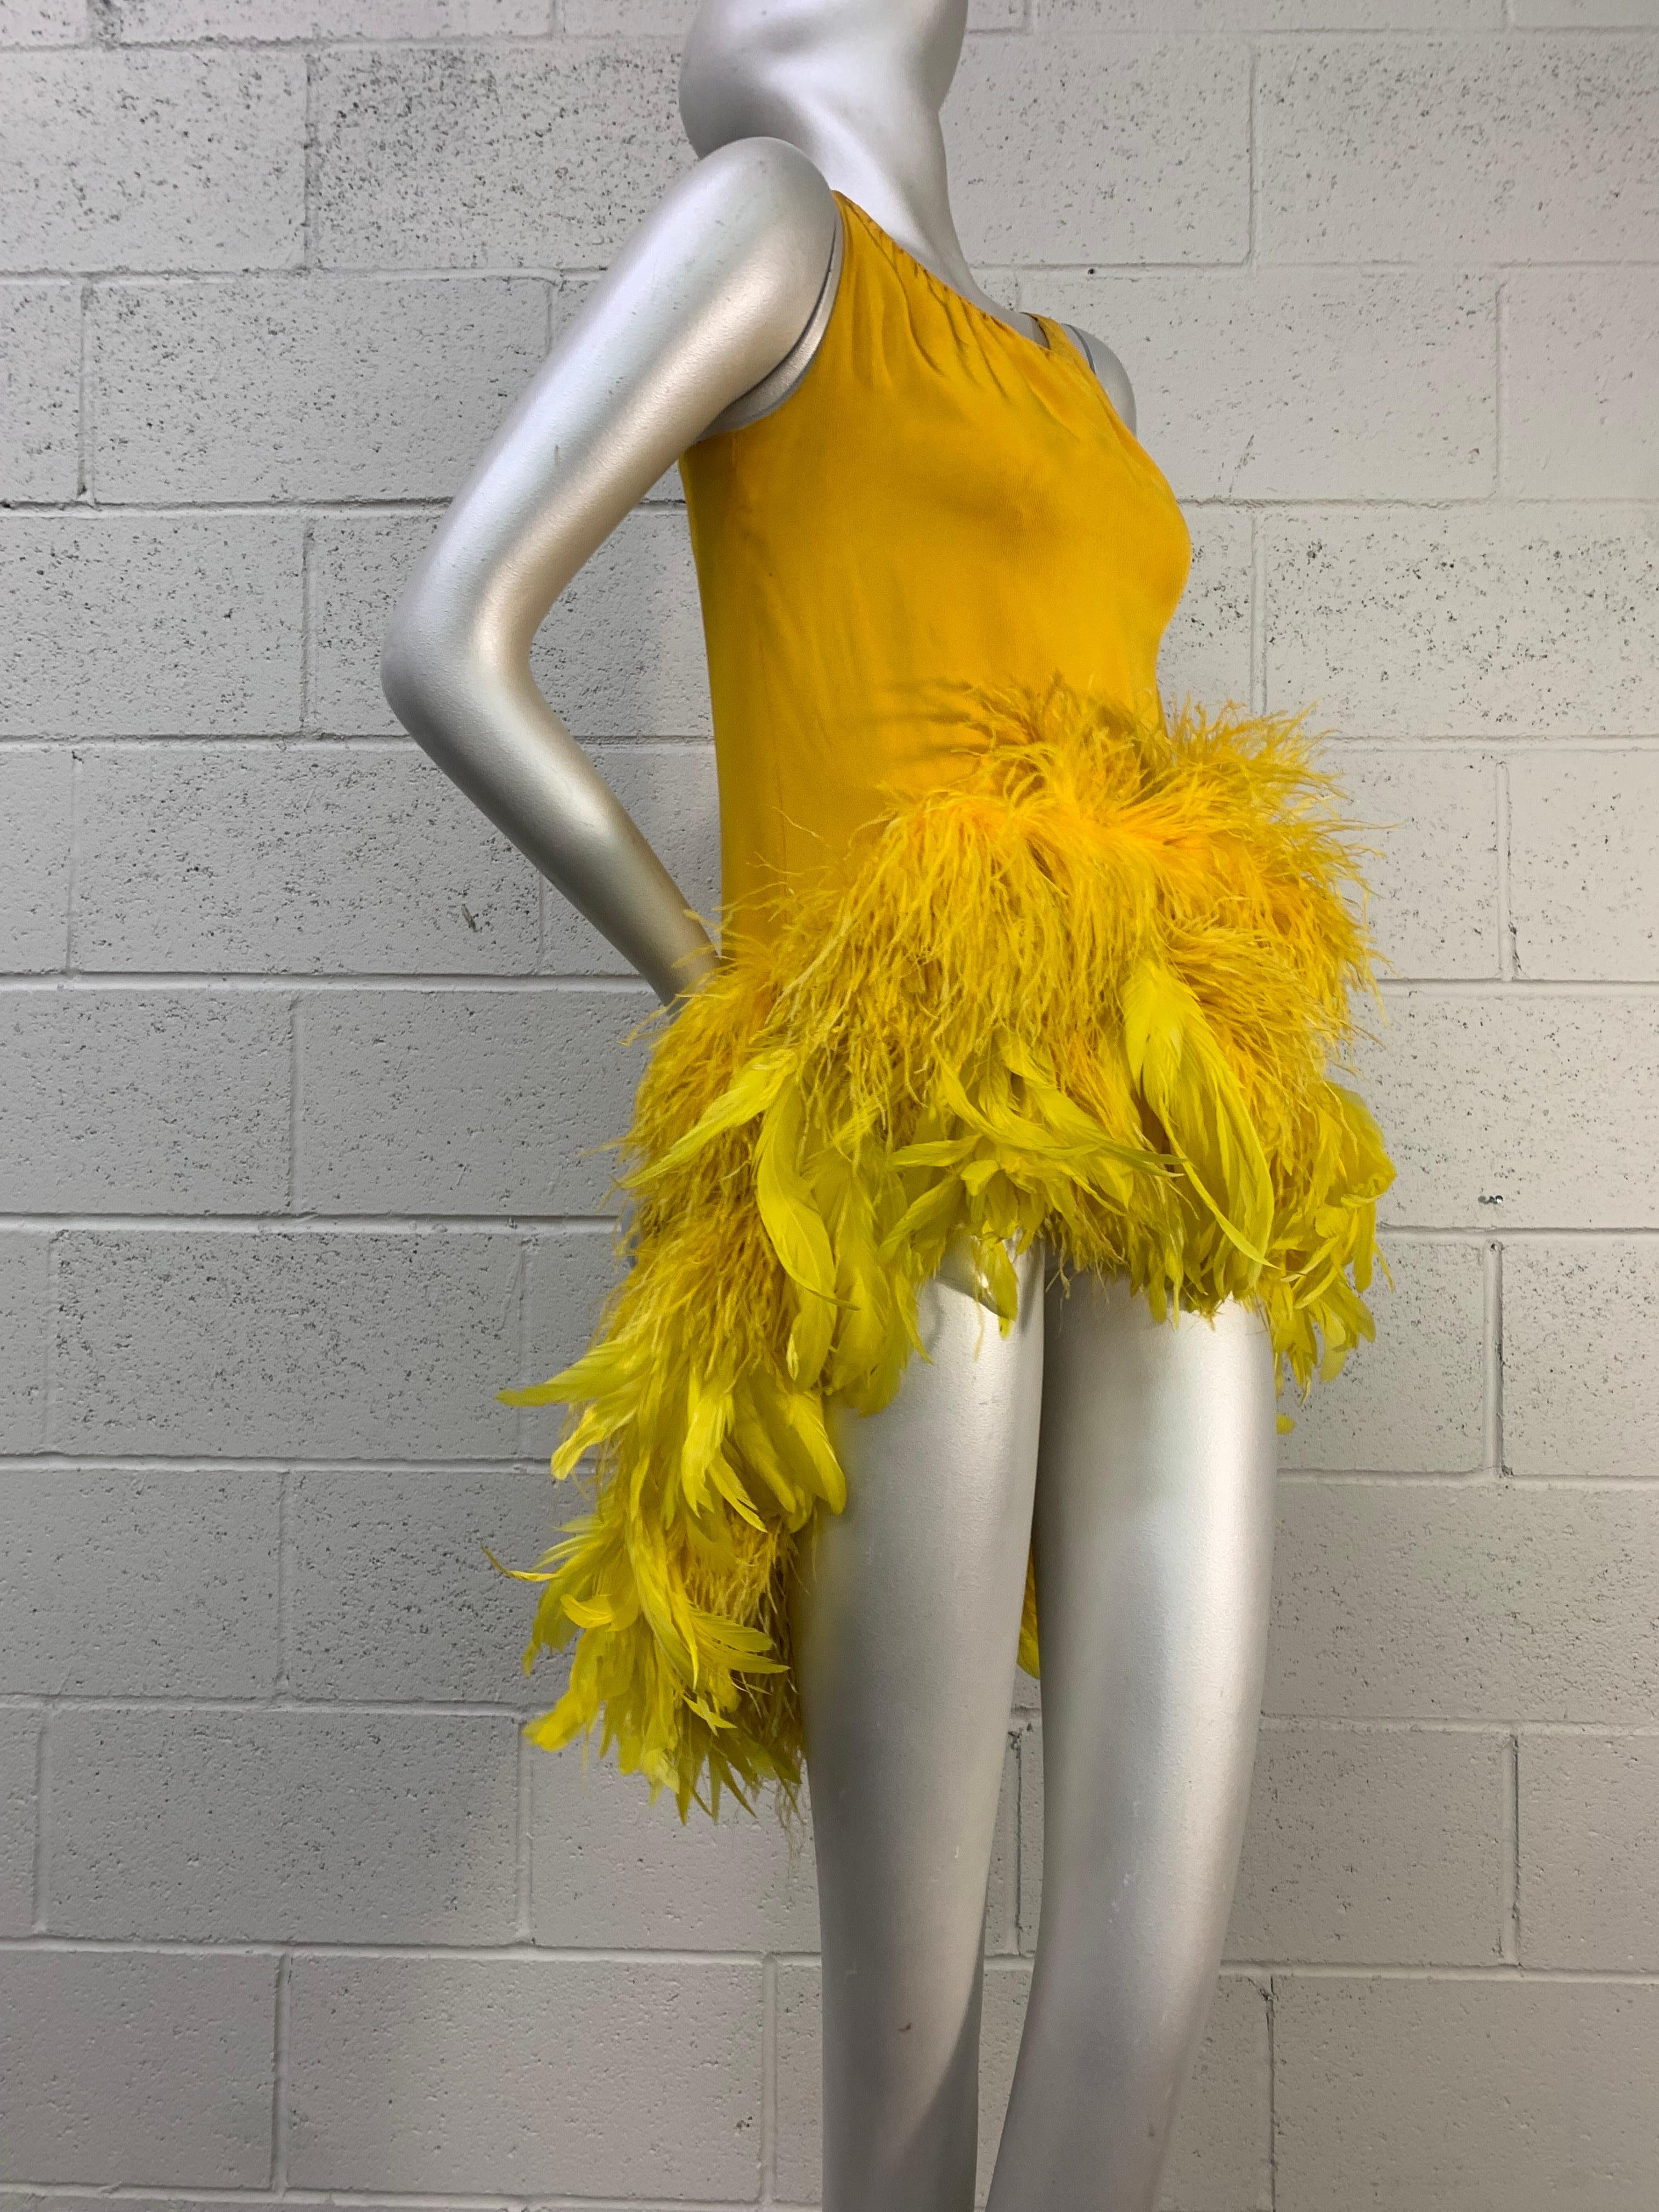 Torso Creations Canary Silk Crepe Micro-Mini Dress w Extravagant Ostrich Trim In Excellent Condition For Sale In Gresham, OR